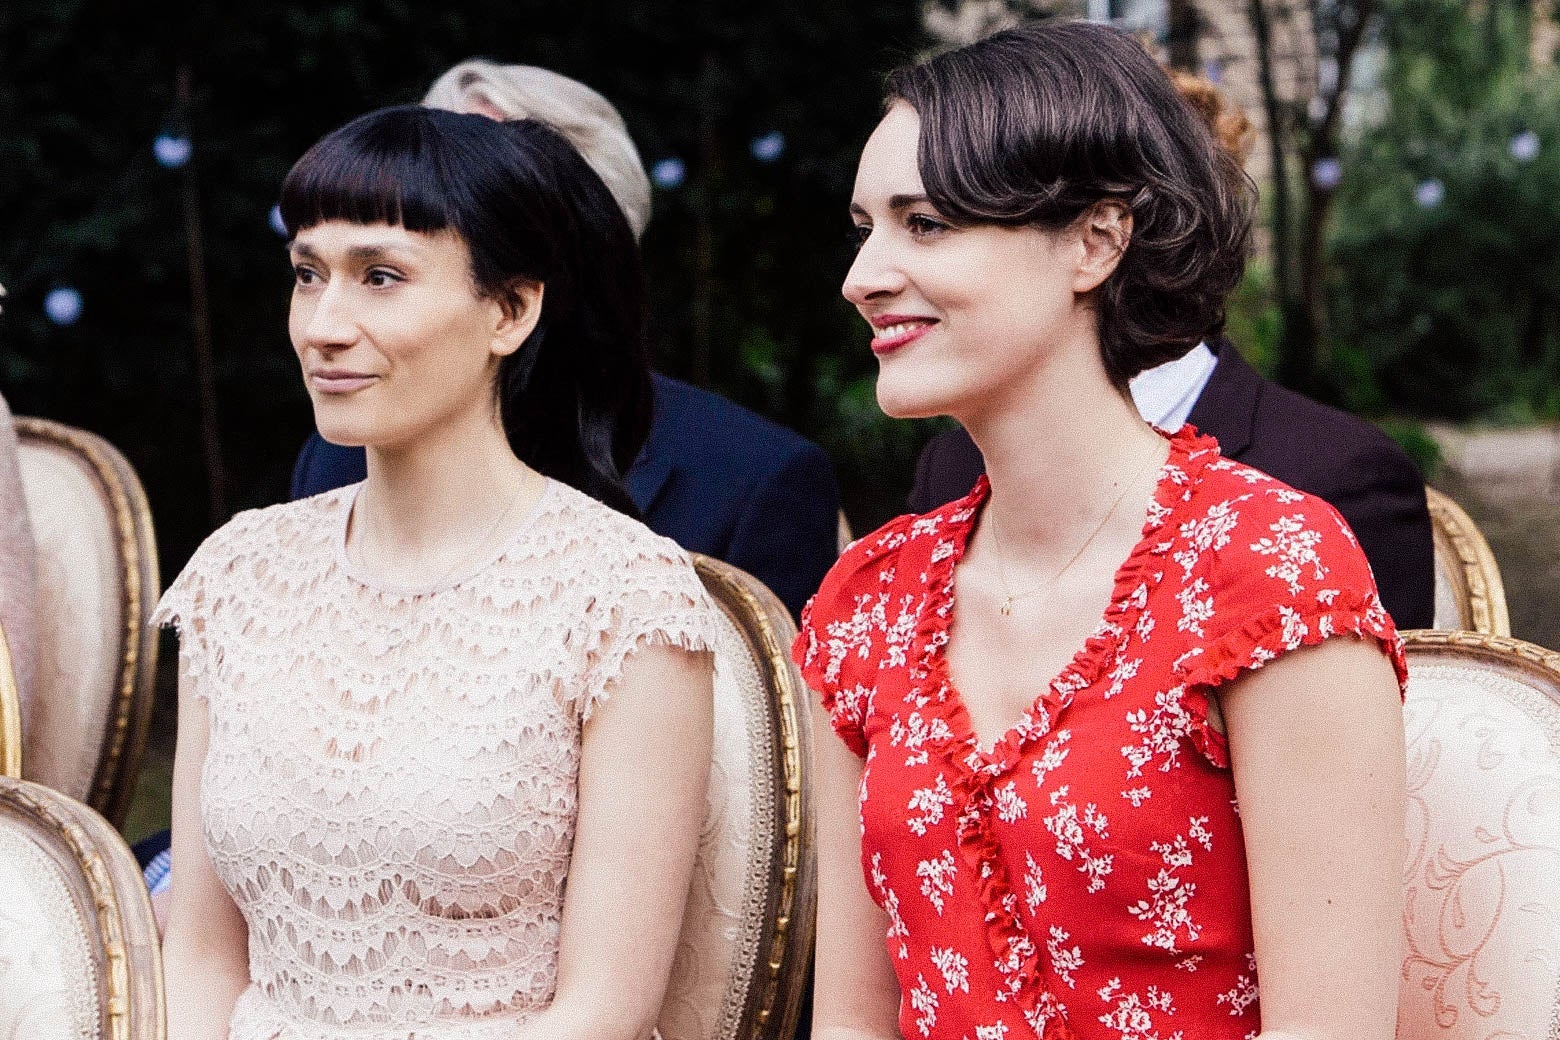 Sian Clifford as Claire and Phoebe Waller-Bridge as Fleabag in Fleabag.